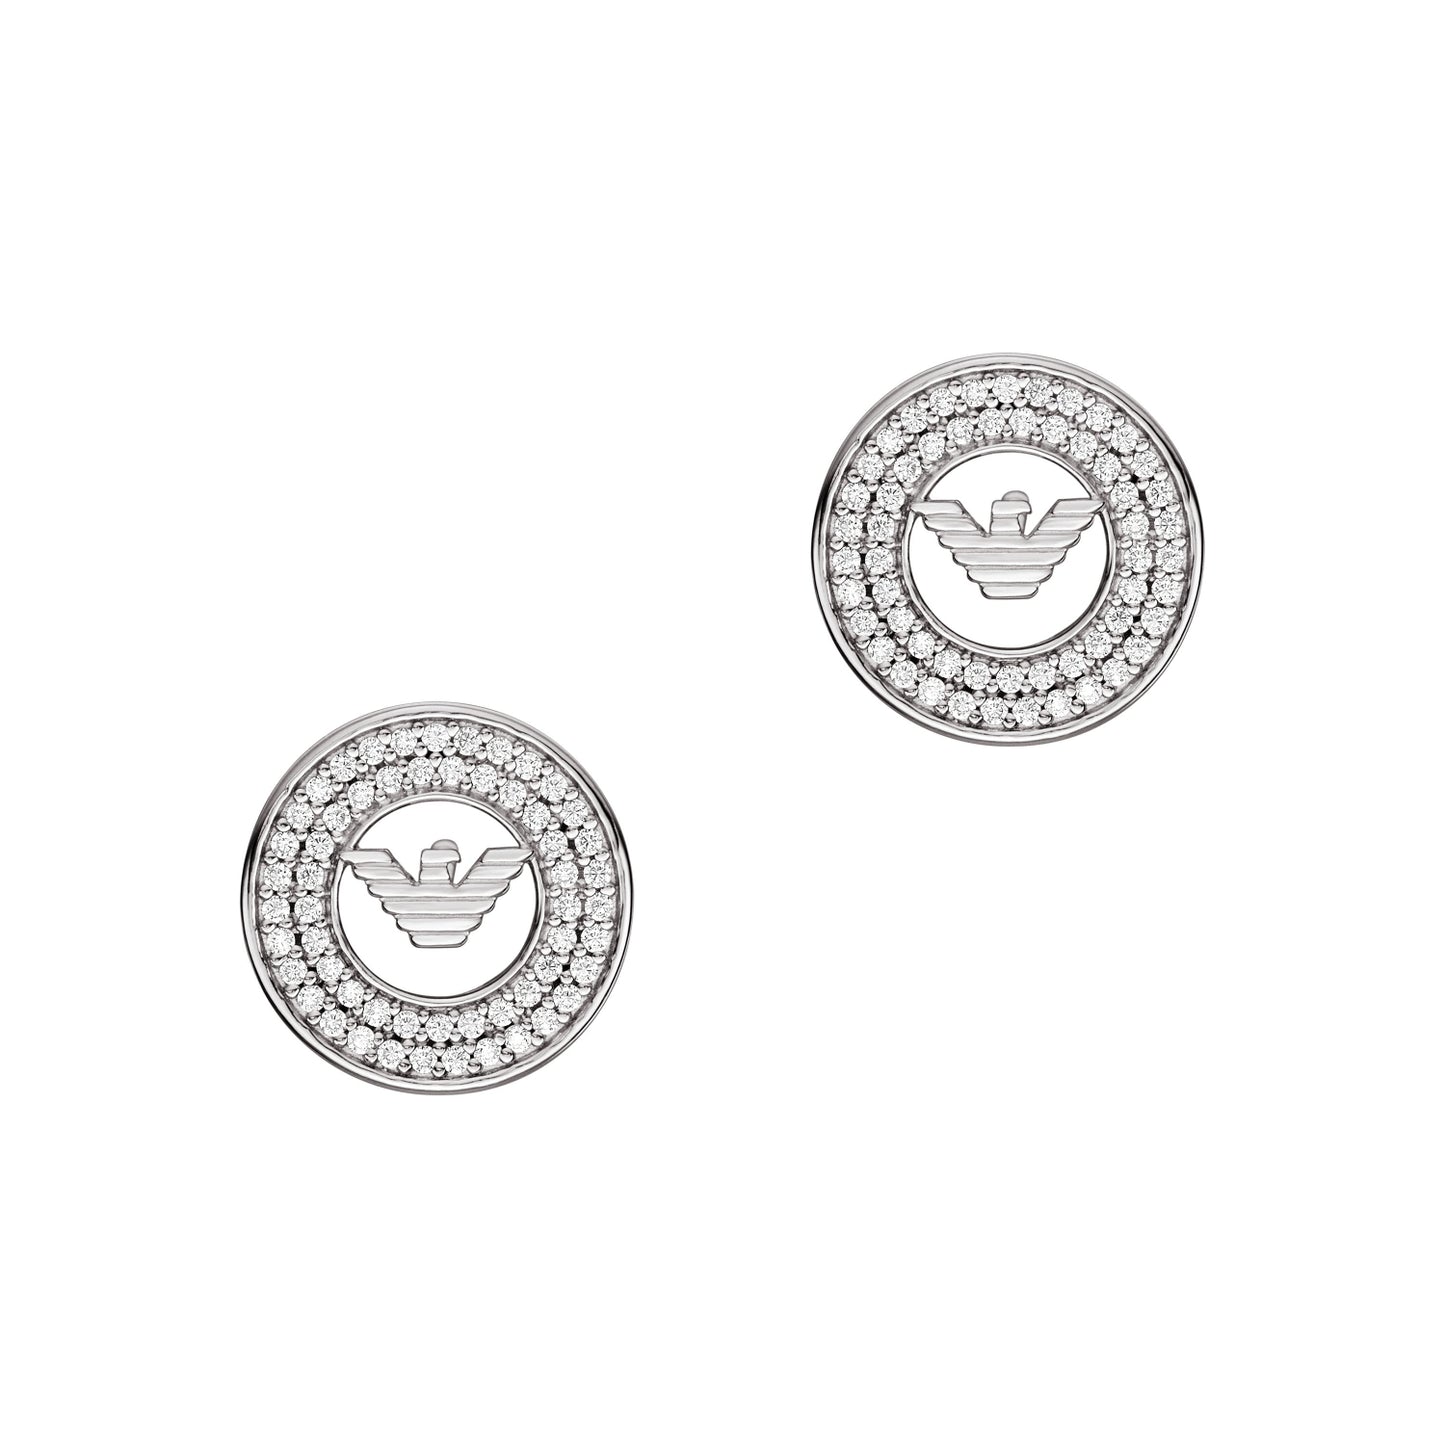 Emporio Armani EG3549040 Earrings In Platinum Plated Silver